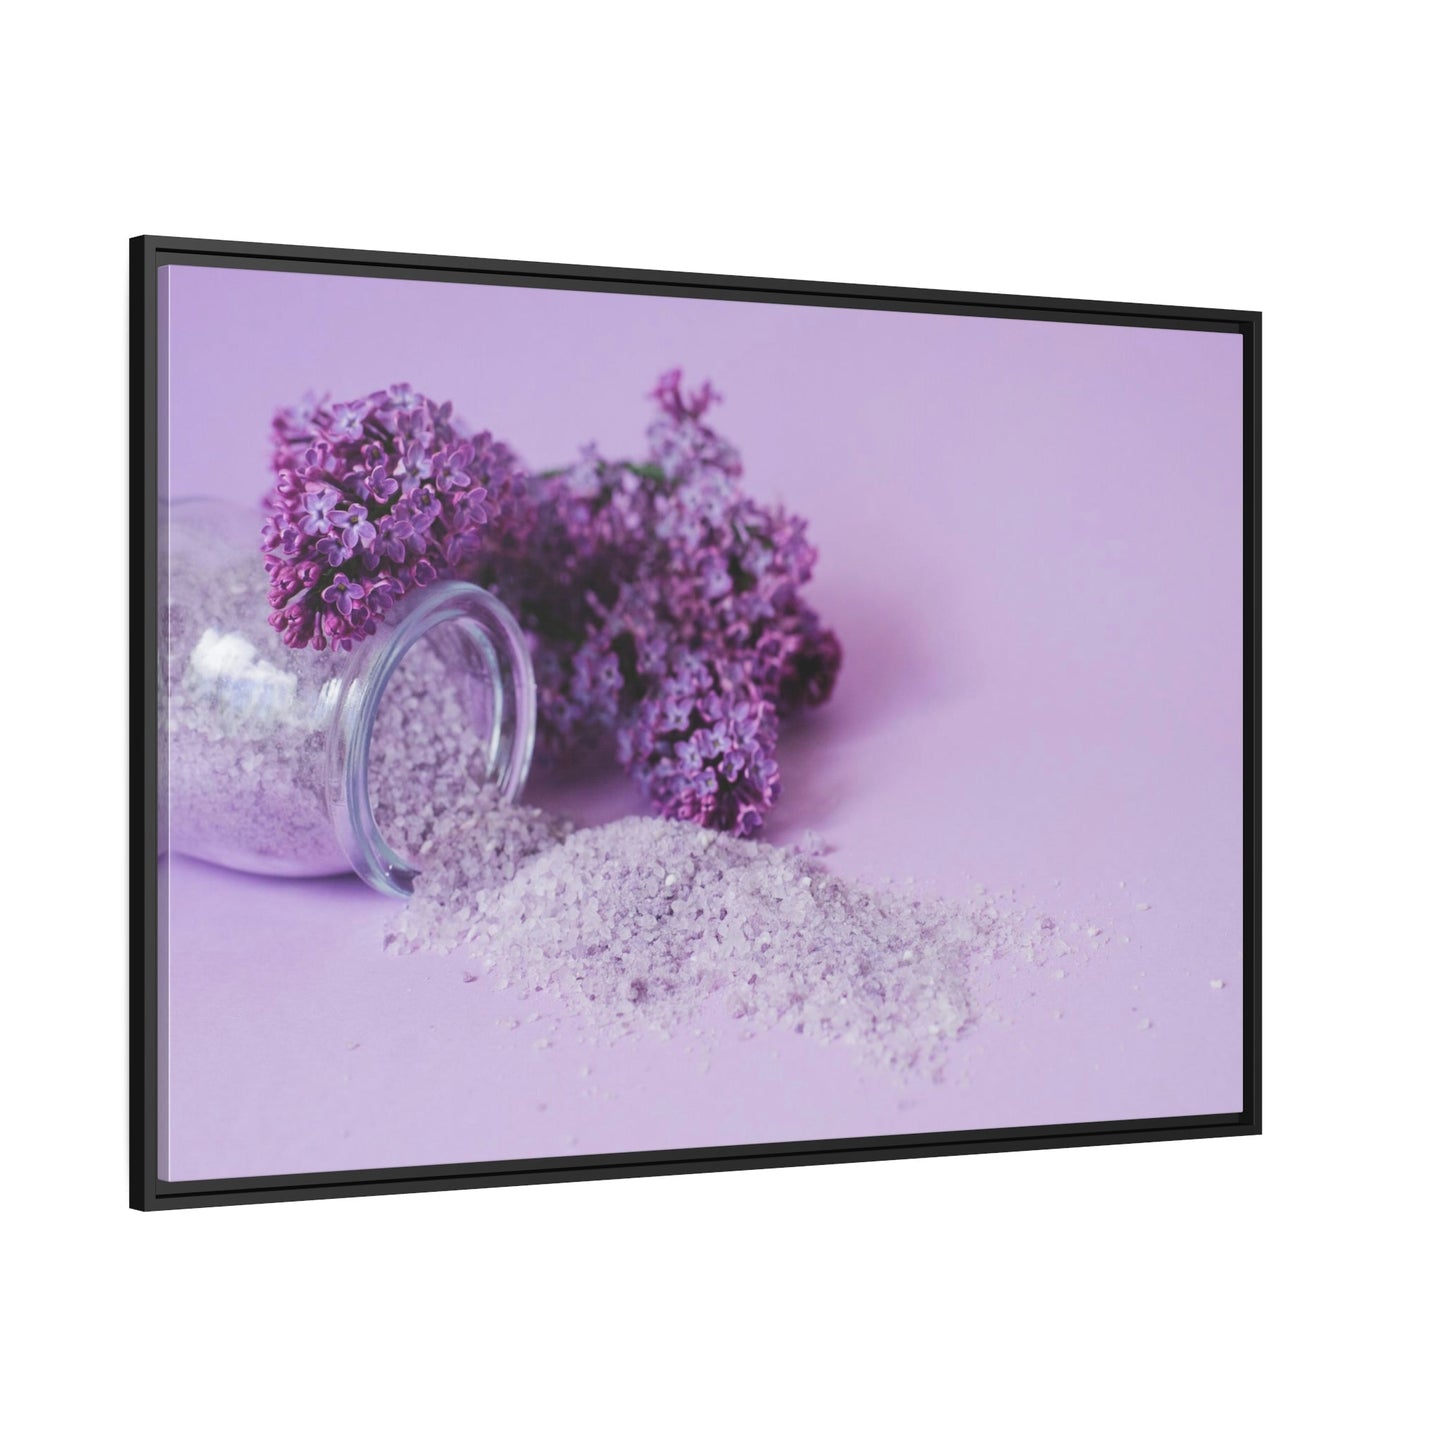 A Fragrant Bouquet of Lilacs: Capturing the Essence of Spring